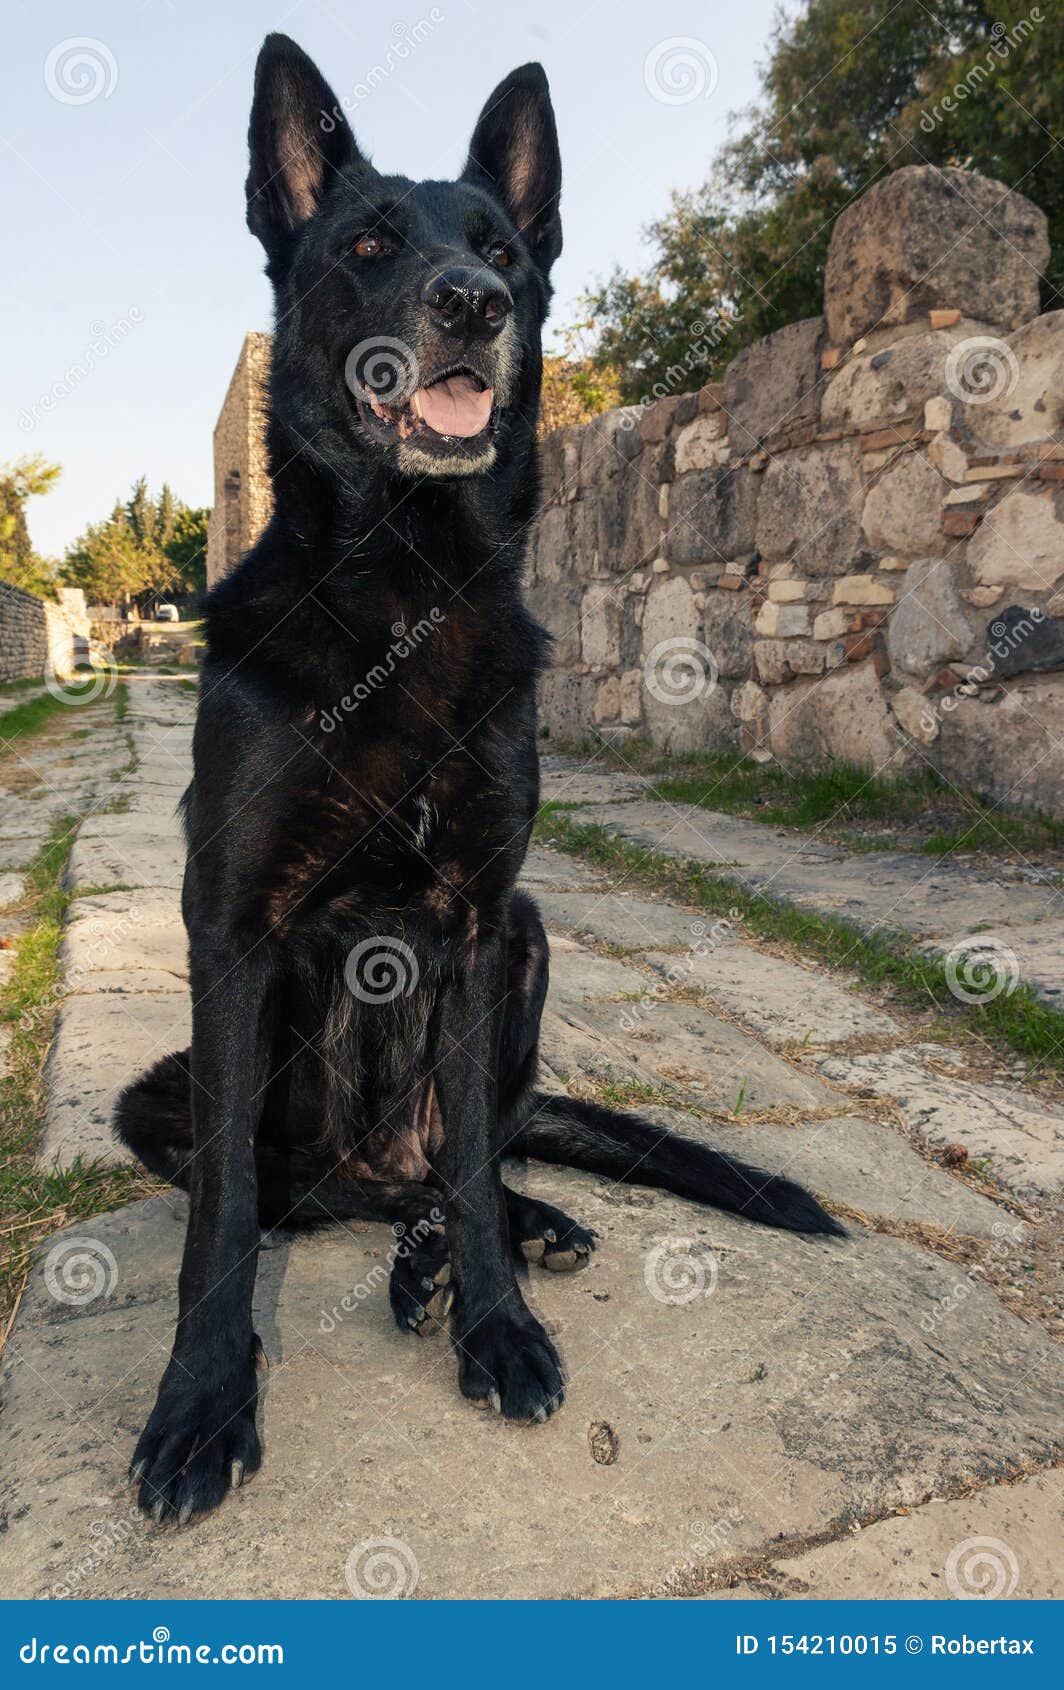 black belgian malinois dog sitting on paving stone of an ancient greek alley